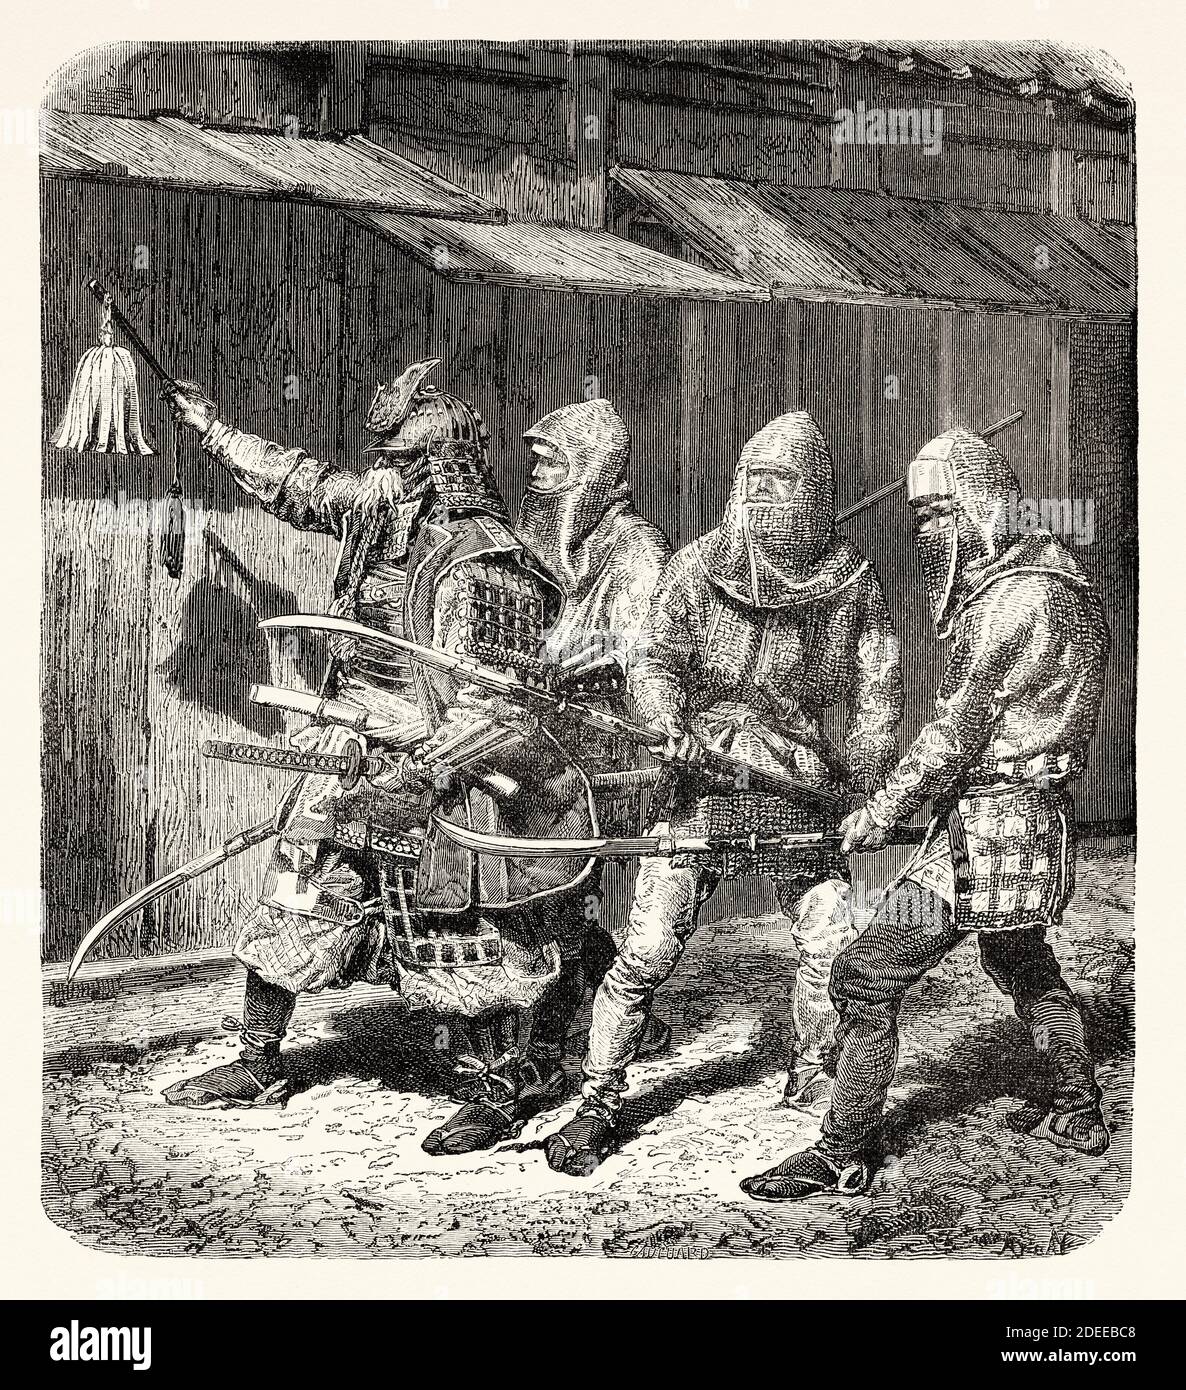 Japanese officer and soldiers during the 13th century civil wars, Japan. Old 19th century engraved illustration Travel to Japan by Aime Humbert  from El Mundo en La Mano 1879 Stock Photo